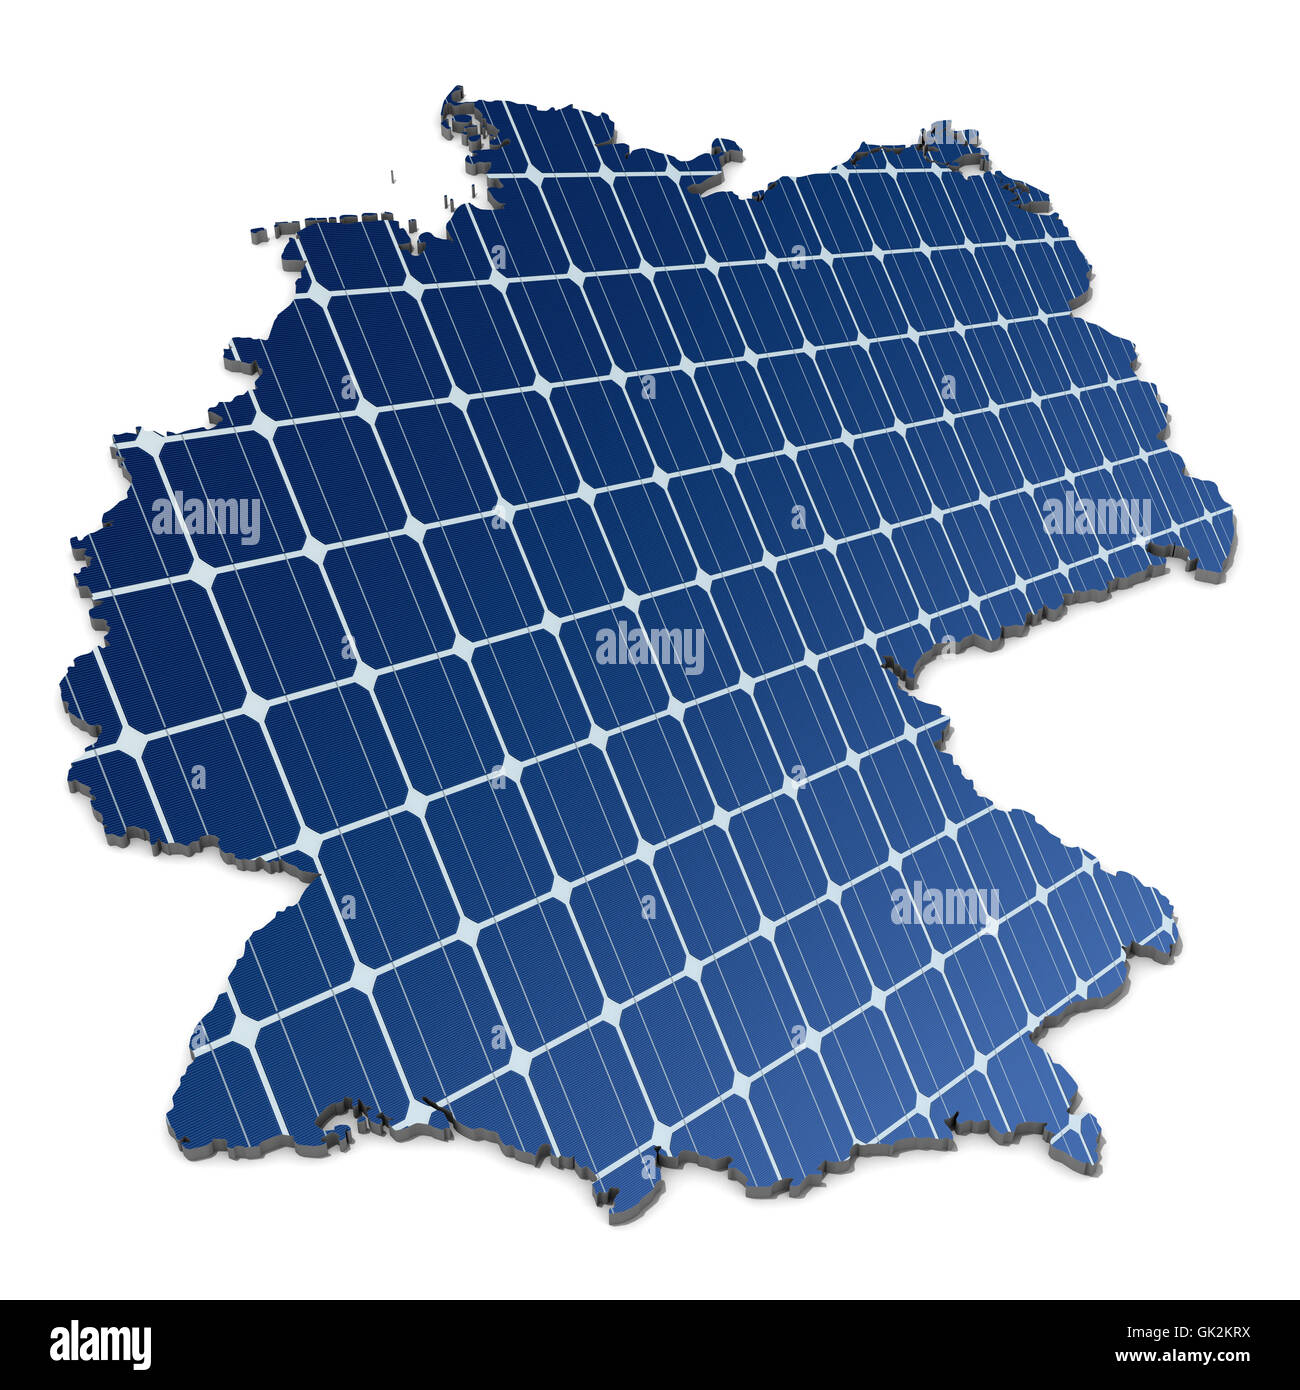 monocrystalline solar cells in an abstract map of germany Stock Photo